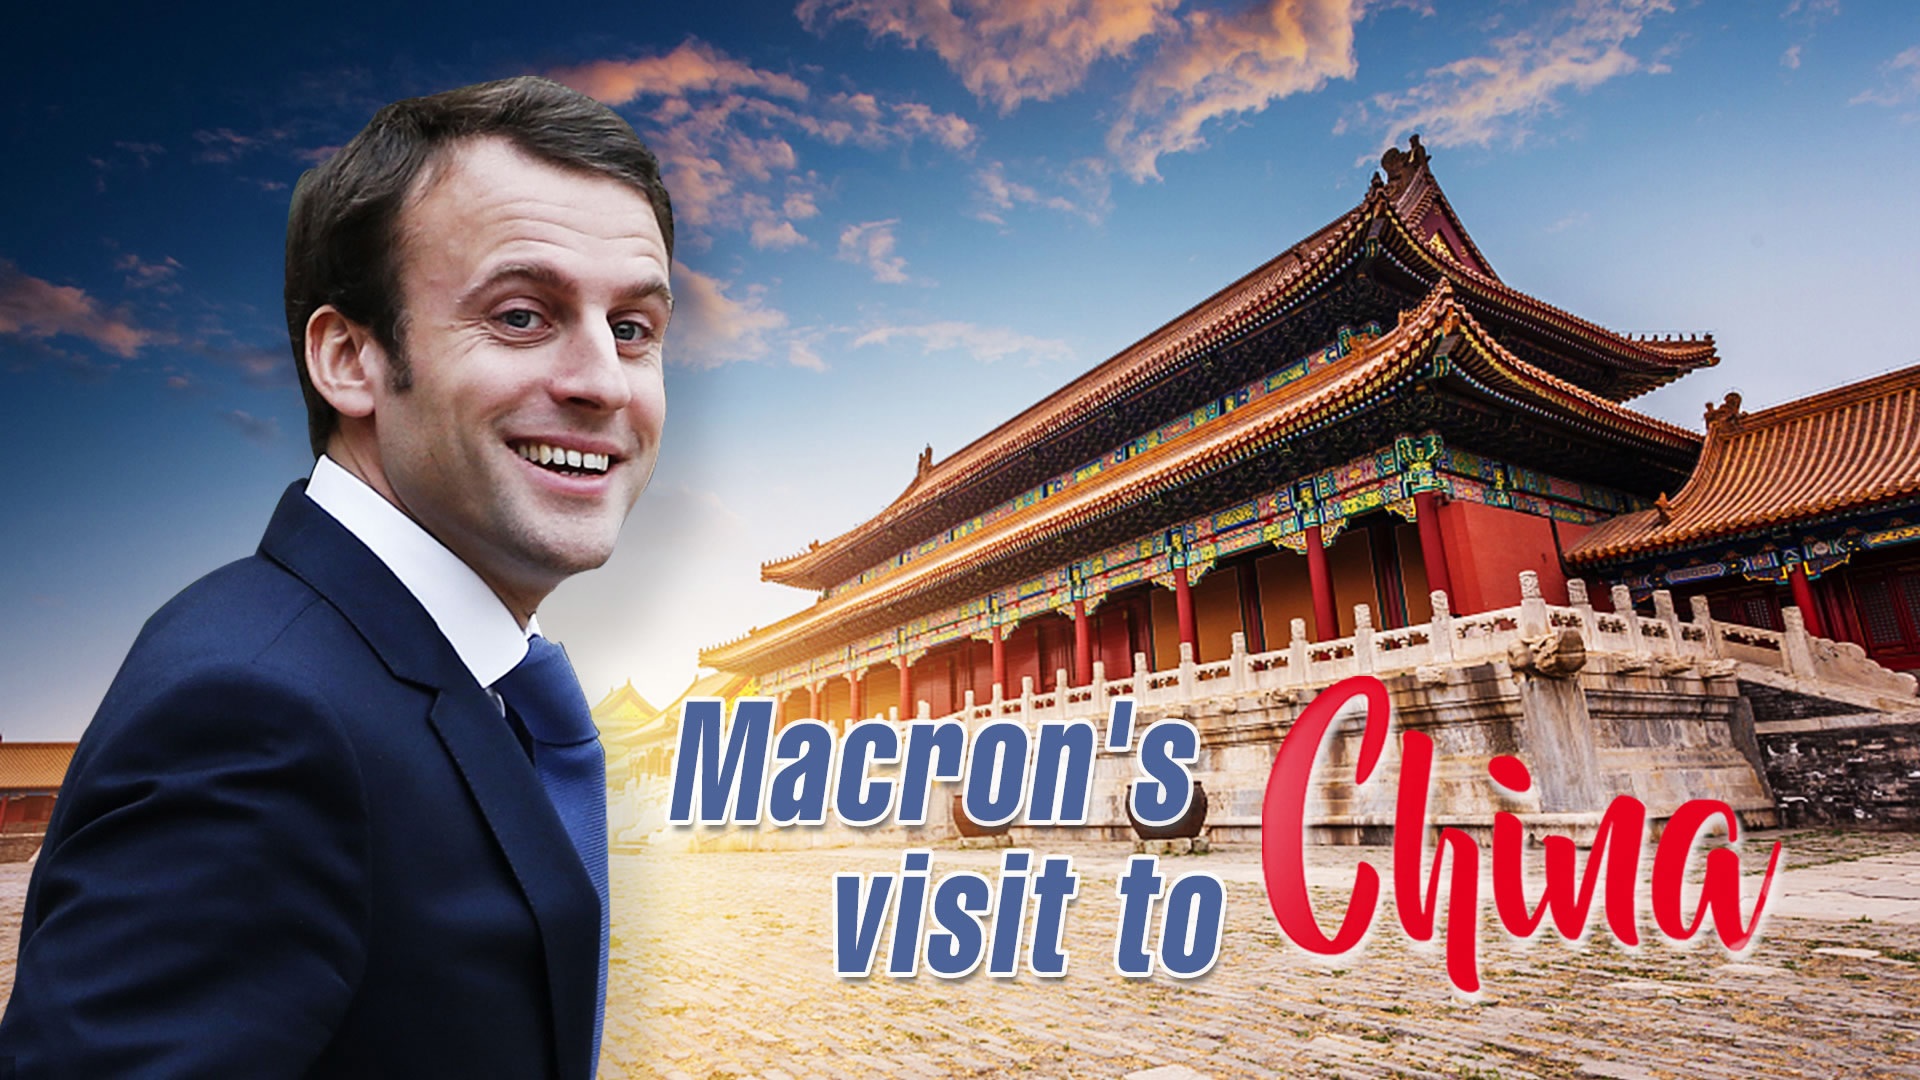 Macron's visit to China What's on the agenda? CGTN